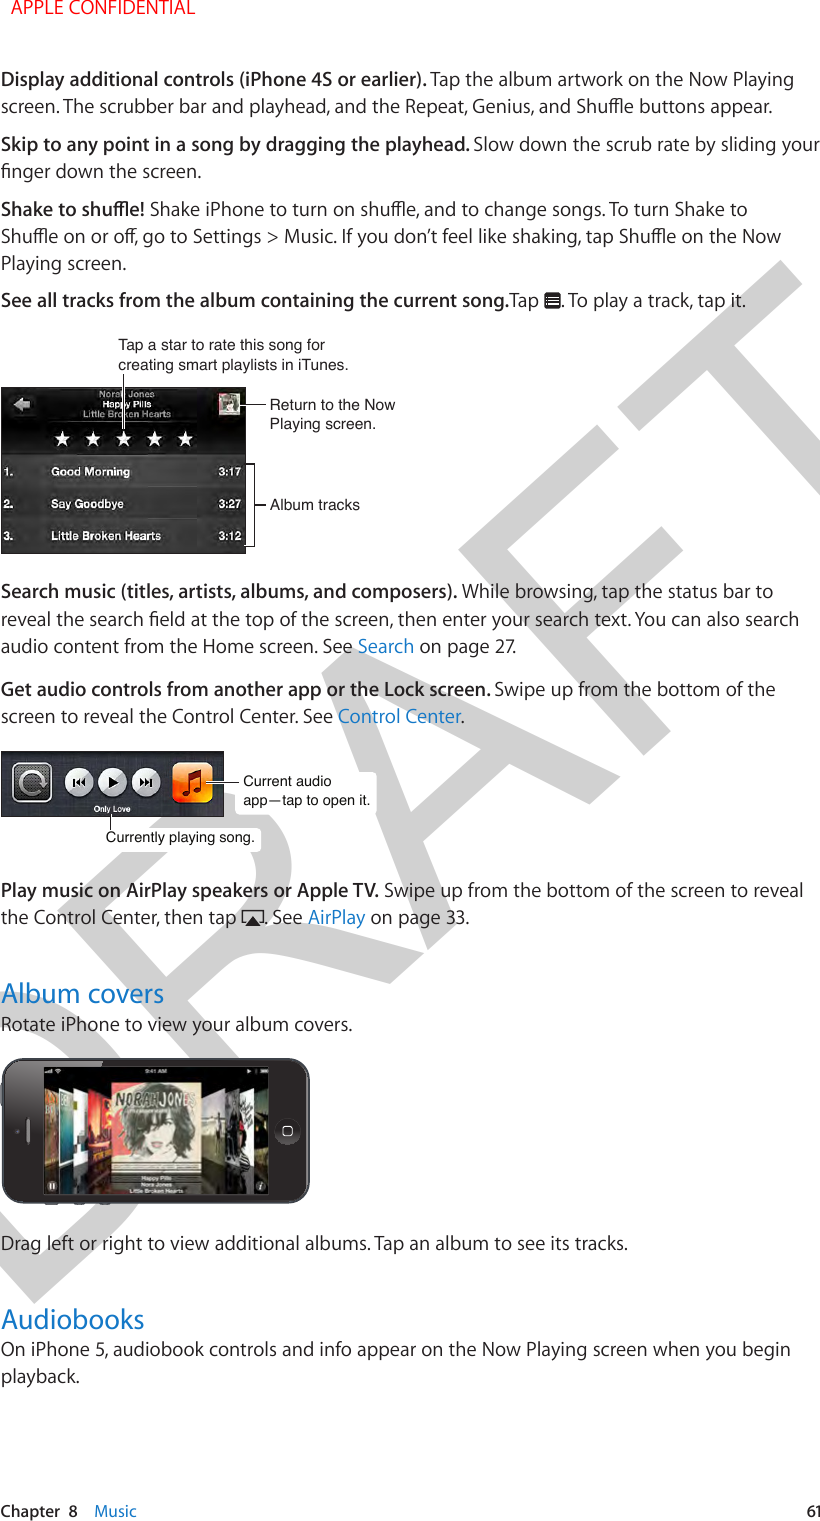 DRAFTChapter  8    Music  61Display additional controls (iPhone 4S or earlier). Tap the album artwork on the Now Playing Skip to any point in a song by dragging the playhead. Slow down the scrub rate by sliding your Playing screen.See all tracks from the album containing the current song.Tap  . To play a track, tap it.Tap a star to rate this song forcreating smart playlists in iTunes.Tap a star to rate this song forcreating smart playlists in iTunes.Return to the Now Playing screen.Return to the Now Playing screen.Album tracksAlbum tracksSearch music (titles, artists, albums, and composers). While browsing, tap the status bar to audio content from the Home screen. See Search on page 27.Get audio controls from another app or the Lock screen. Swipe up from the bottom of the screen to reveal the Control Center. See Control Center.Current audio app—tap to open it.Current audio app—tap to open it.Currently playing song.Currently playing song.Play music on AirPlay speakers or Apple TV. Swipe up from the bottom of the screen to reveal the Control Center, then tap  . See AirPlay on page 33.Album coversRotate iPhone to view your album covers.Drag left or right to view additional albums. Tap an album to see its tracks.AudiobooksOn iPhone 5, audiobook controls and info appear on the Now Playing screen when you begin playback.   APPLE CONFIDENTIAL